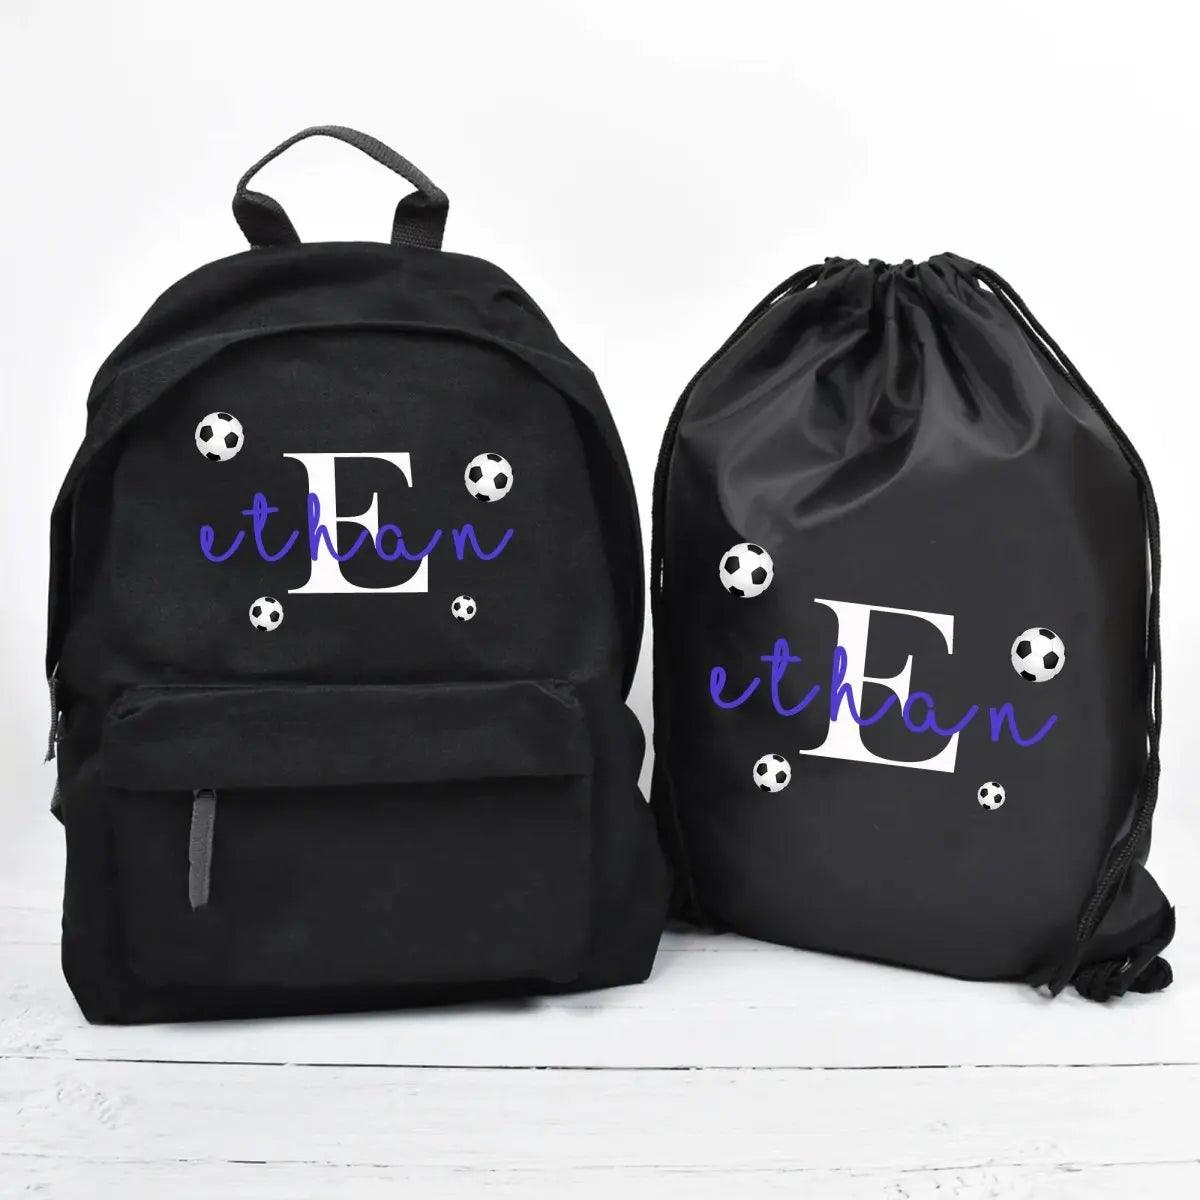 Personalised Football Backpack, Football School Bag, Kids Football Rucksack, Boys School Backpack, Children Student Backpack, Back To School - Amy Lucy